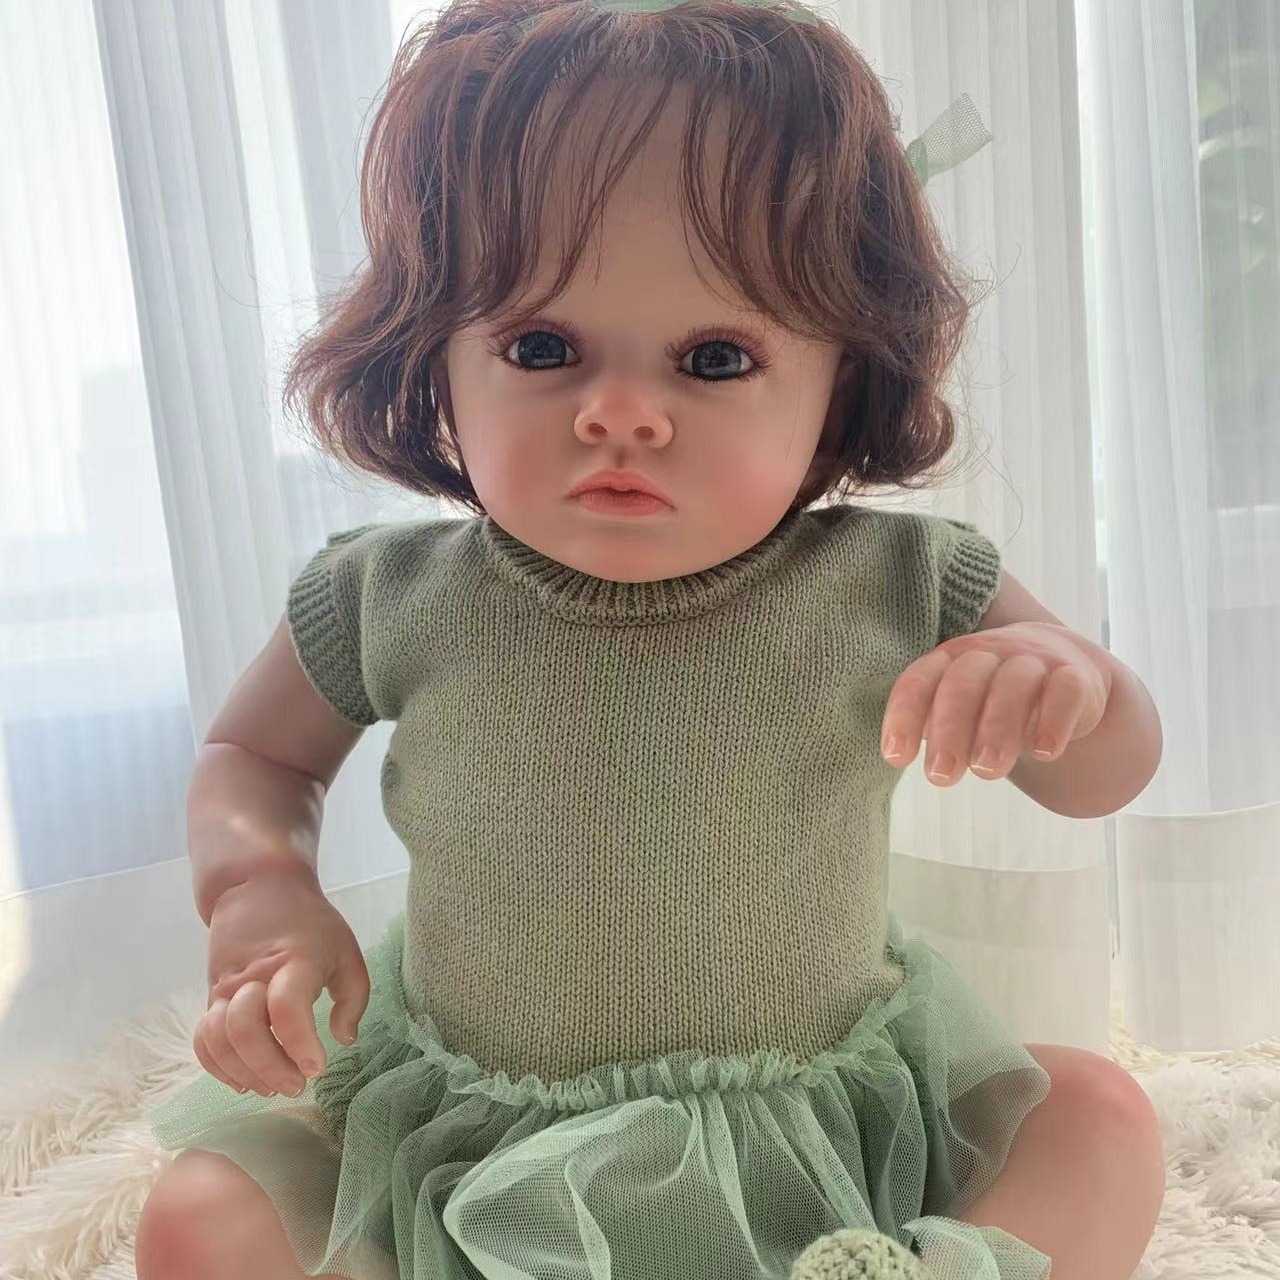 Adorable Real Looking Baby Dolls  Baby girl dolls, Real baby dolls, Life  like baby dolls